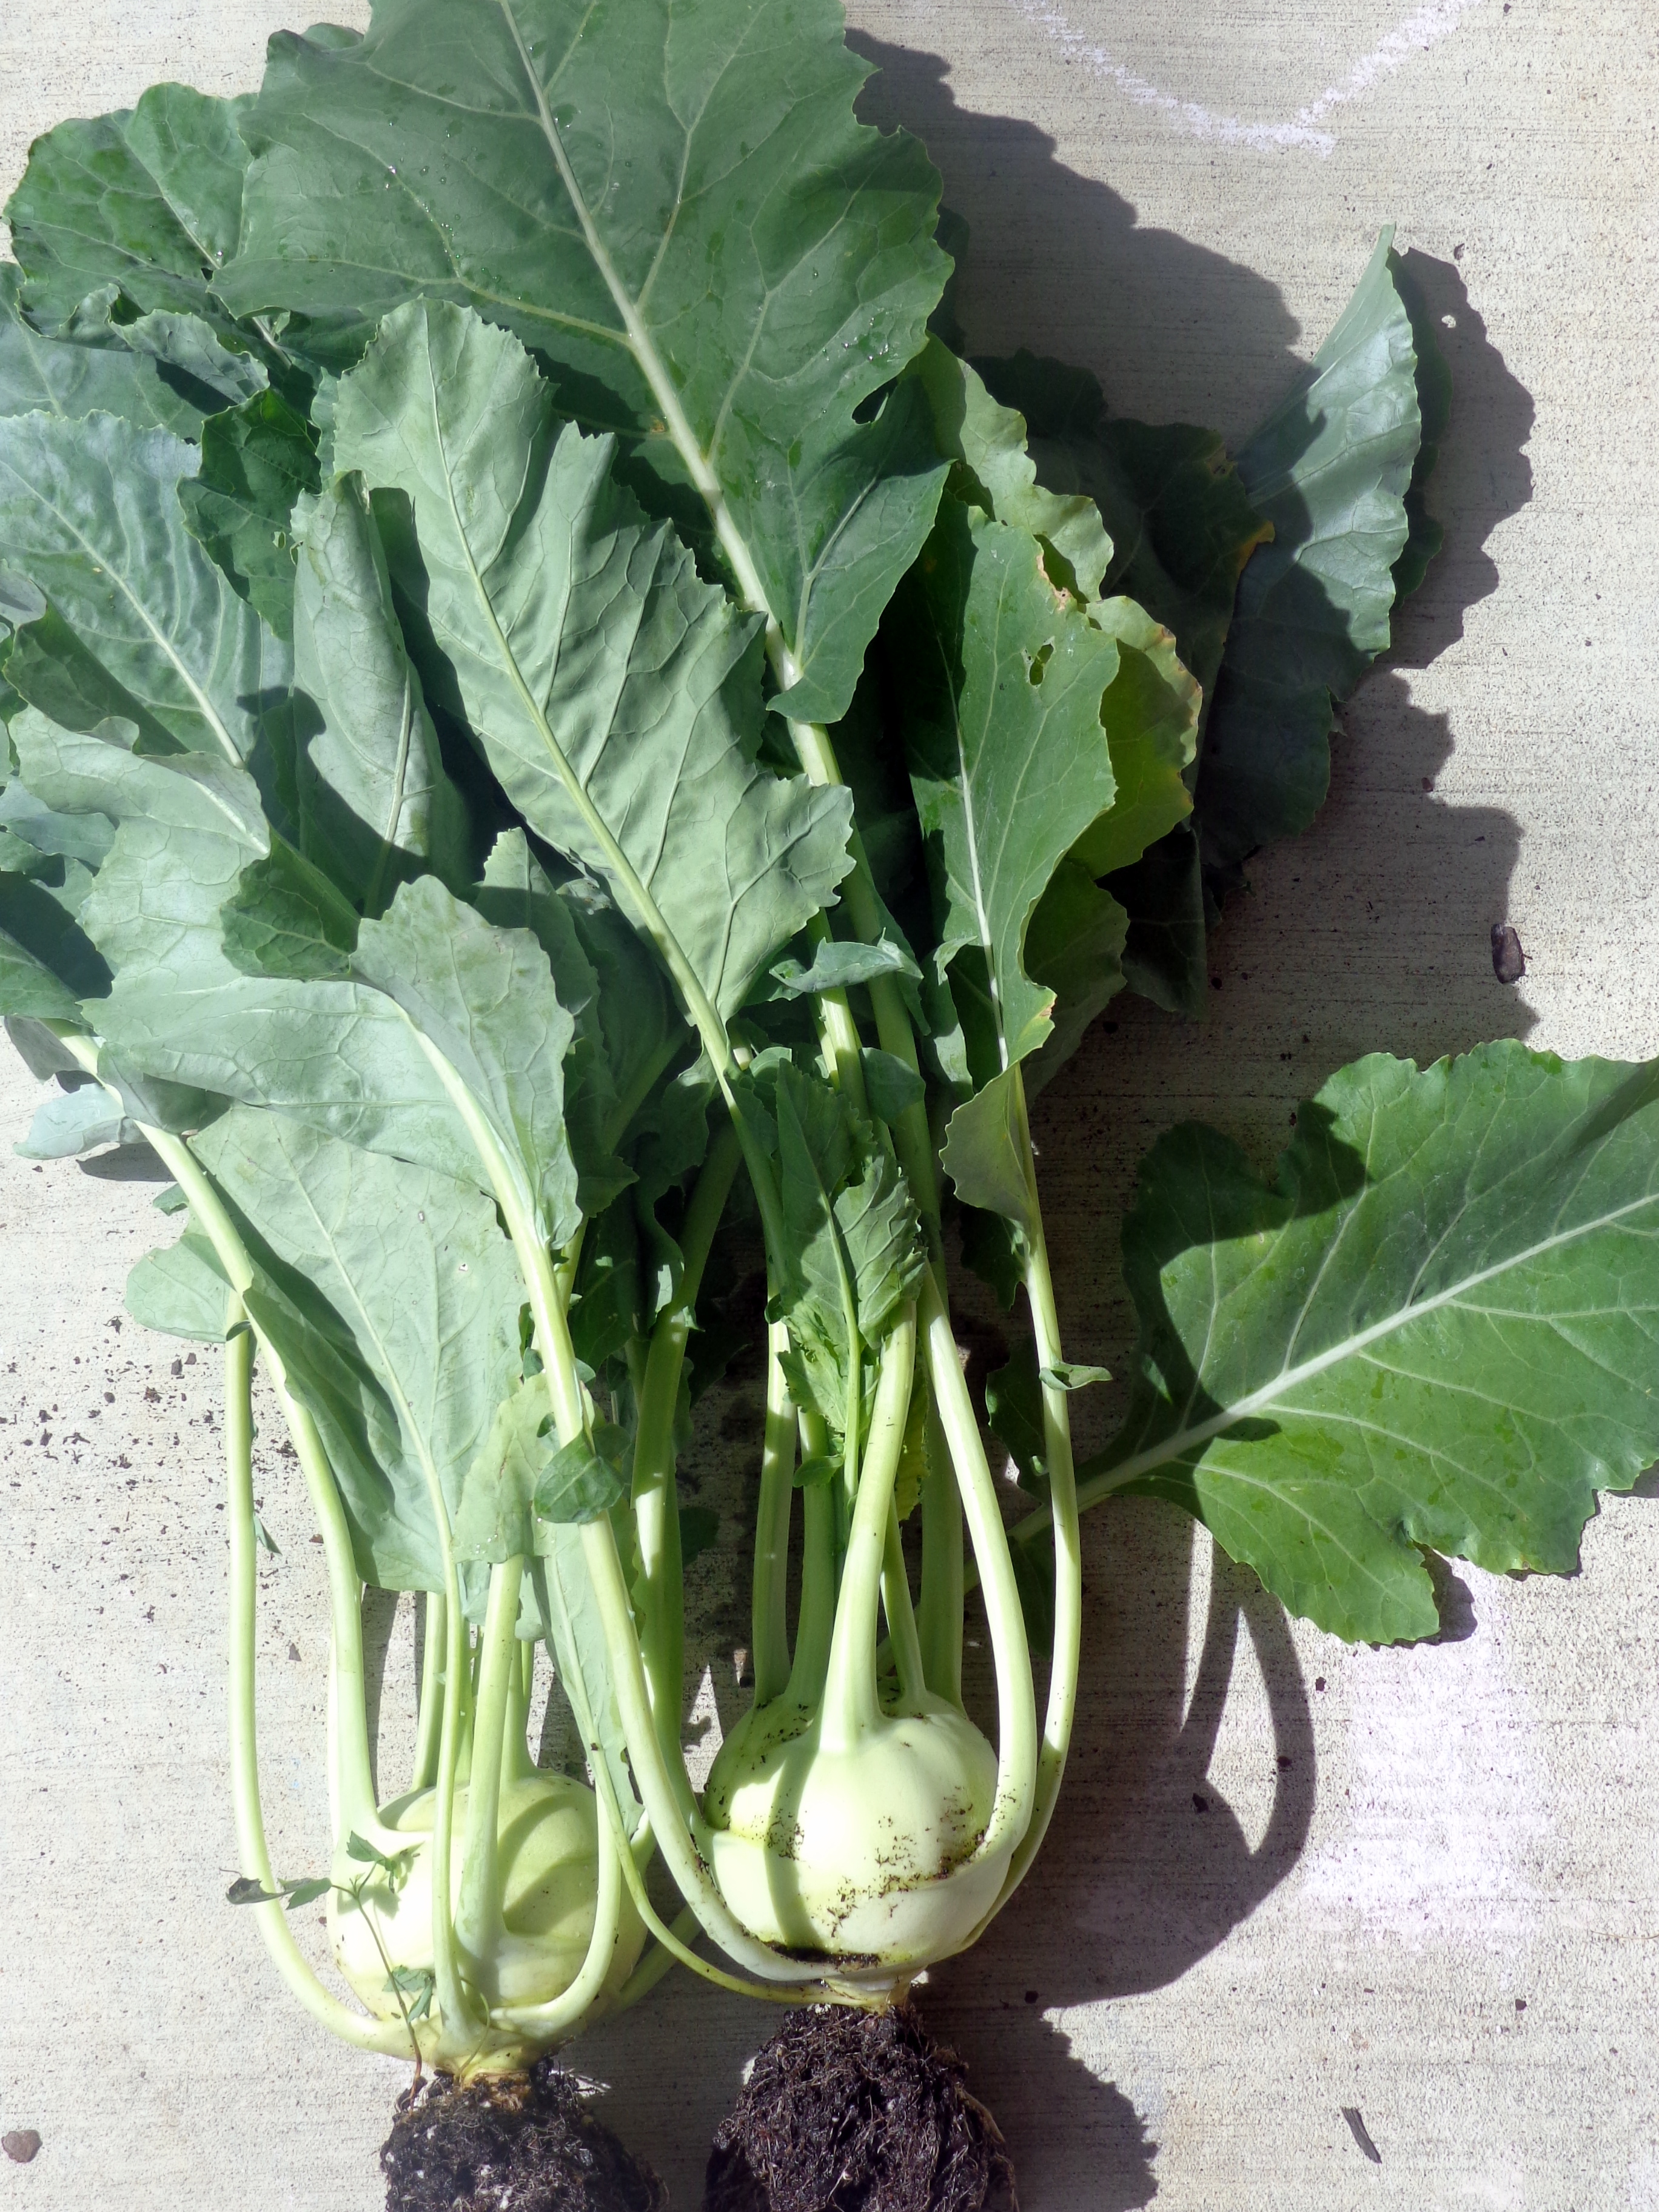 Growing Kohlrabi/ noolkol in the garden and curry made two ways ...